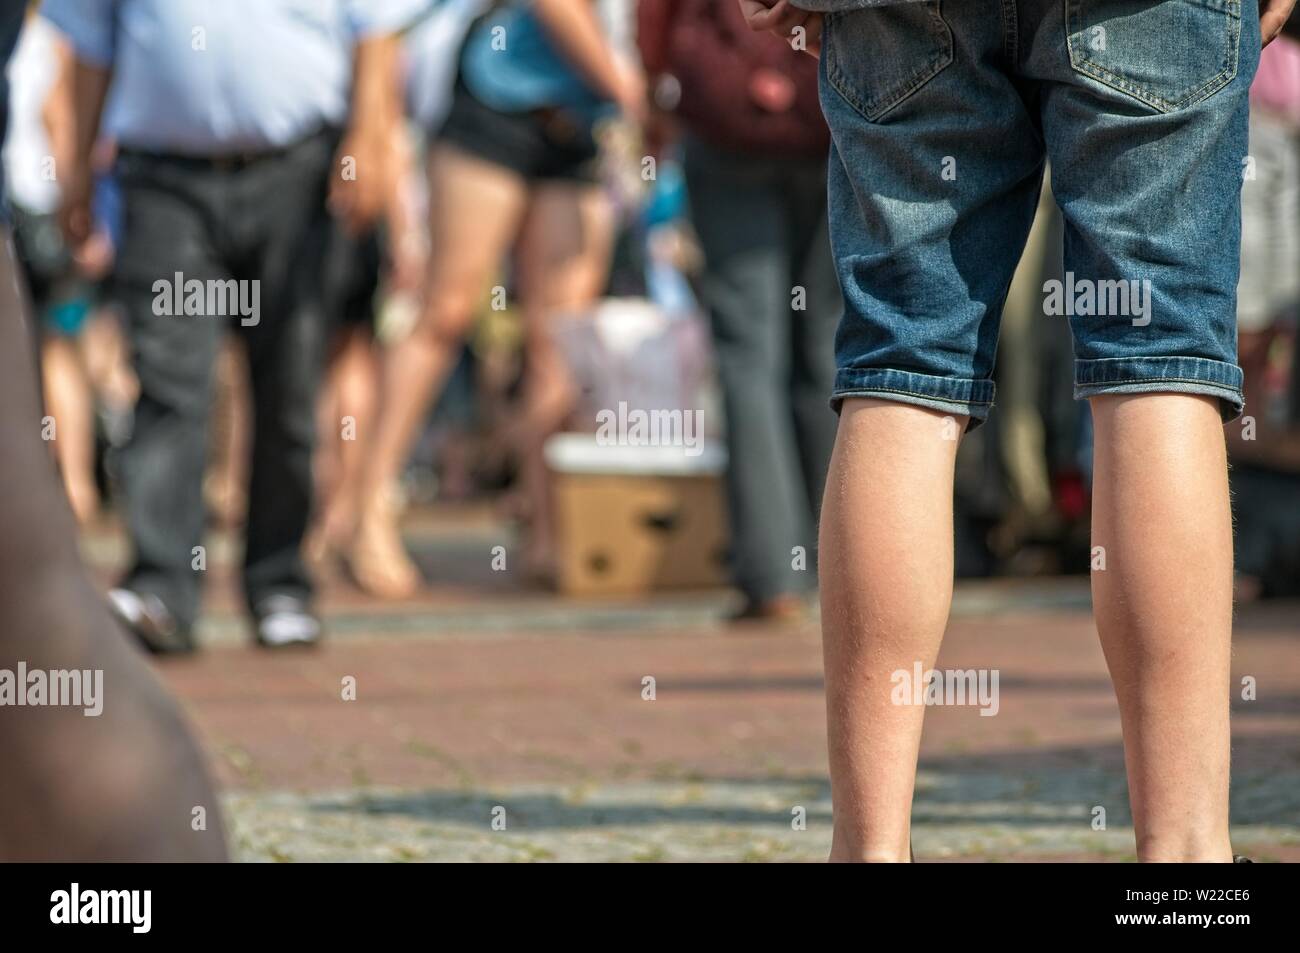 single woman standing before a crowd of people at a weekend flea market on the streets with blurred background Stock Photo